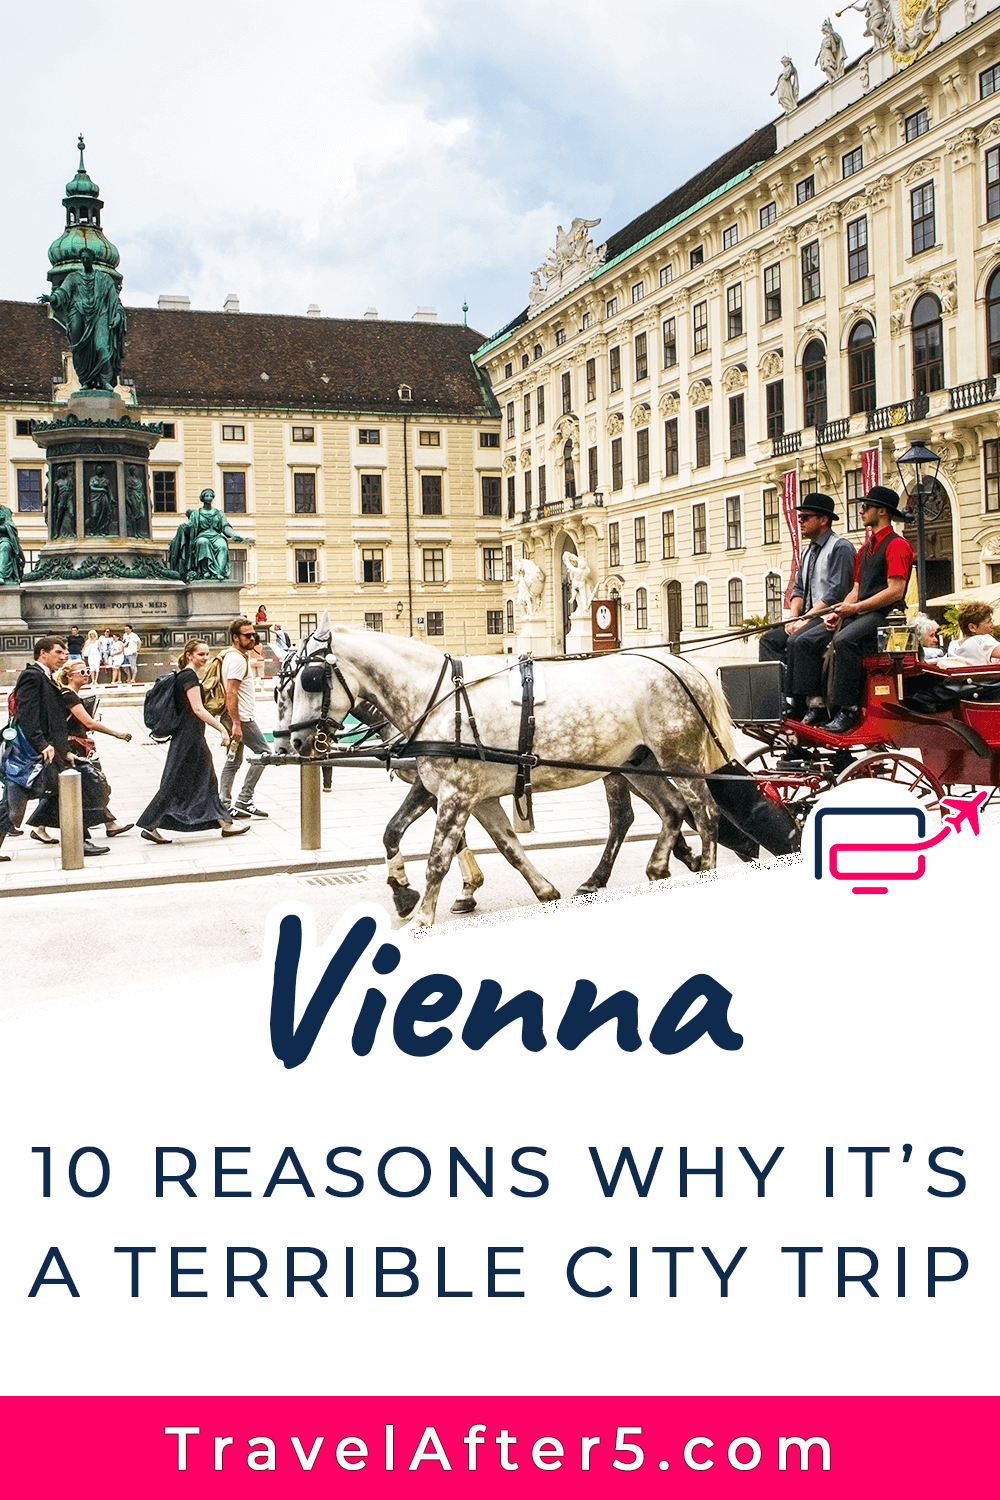 Pinterest Pin to 10 Reasons Why Vienna Makes a Terrible City Trip, by Travel After 5